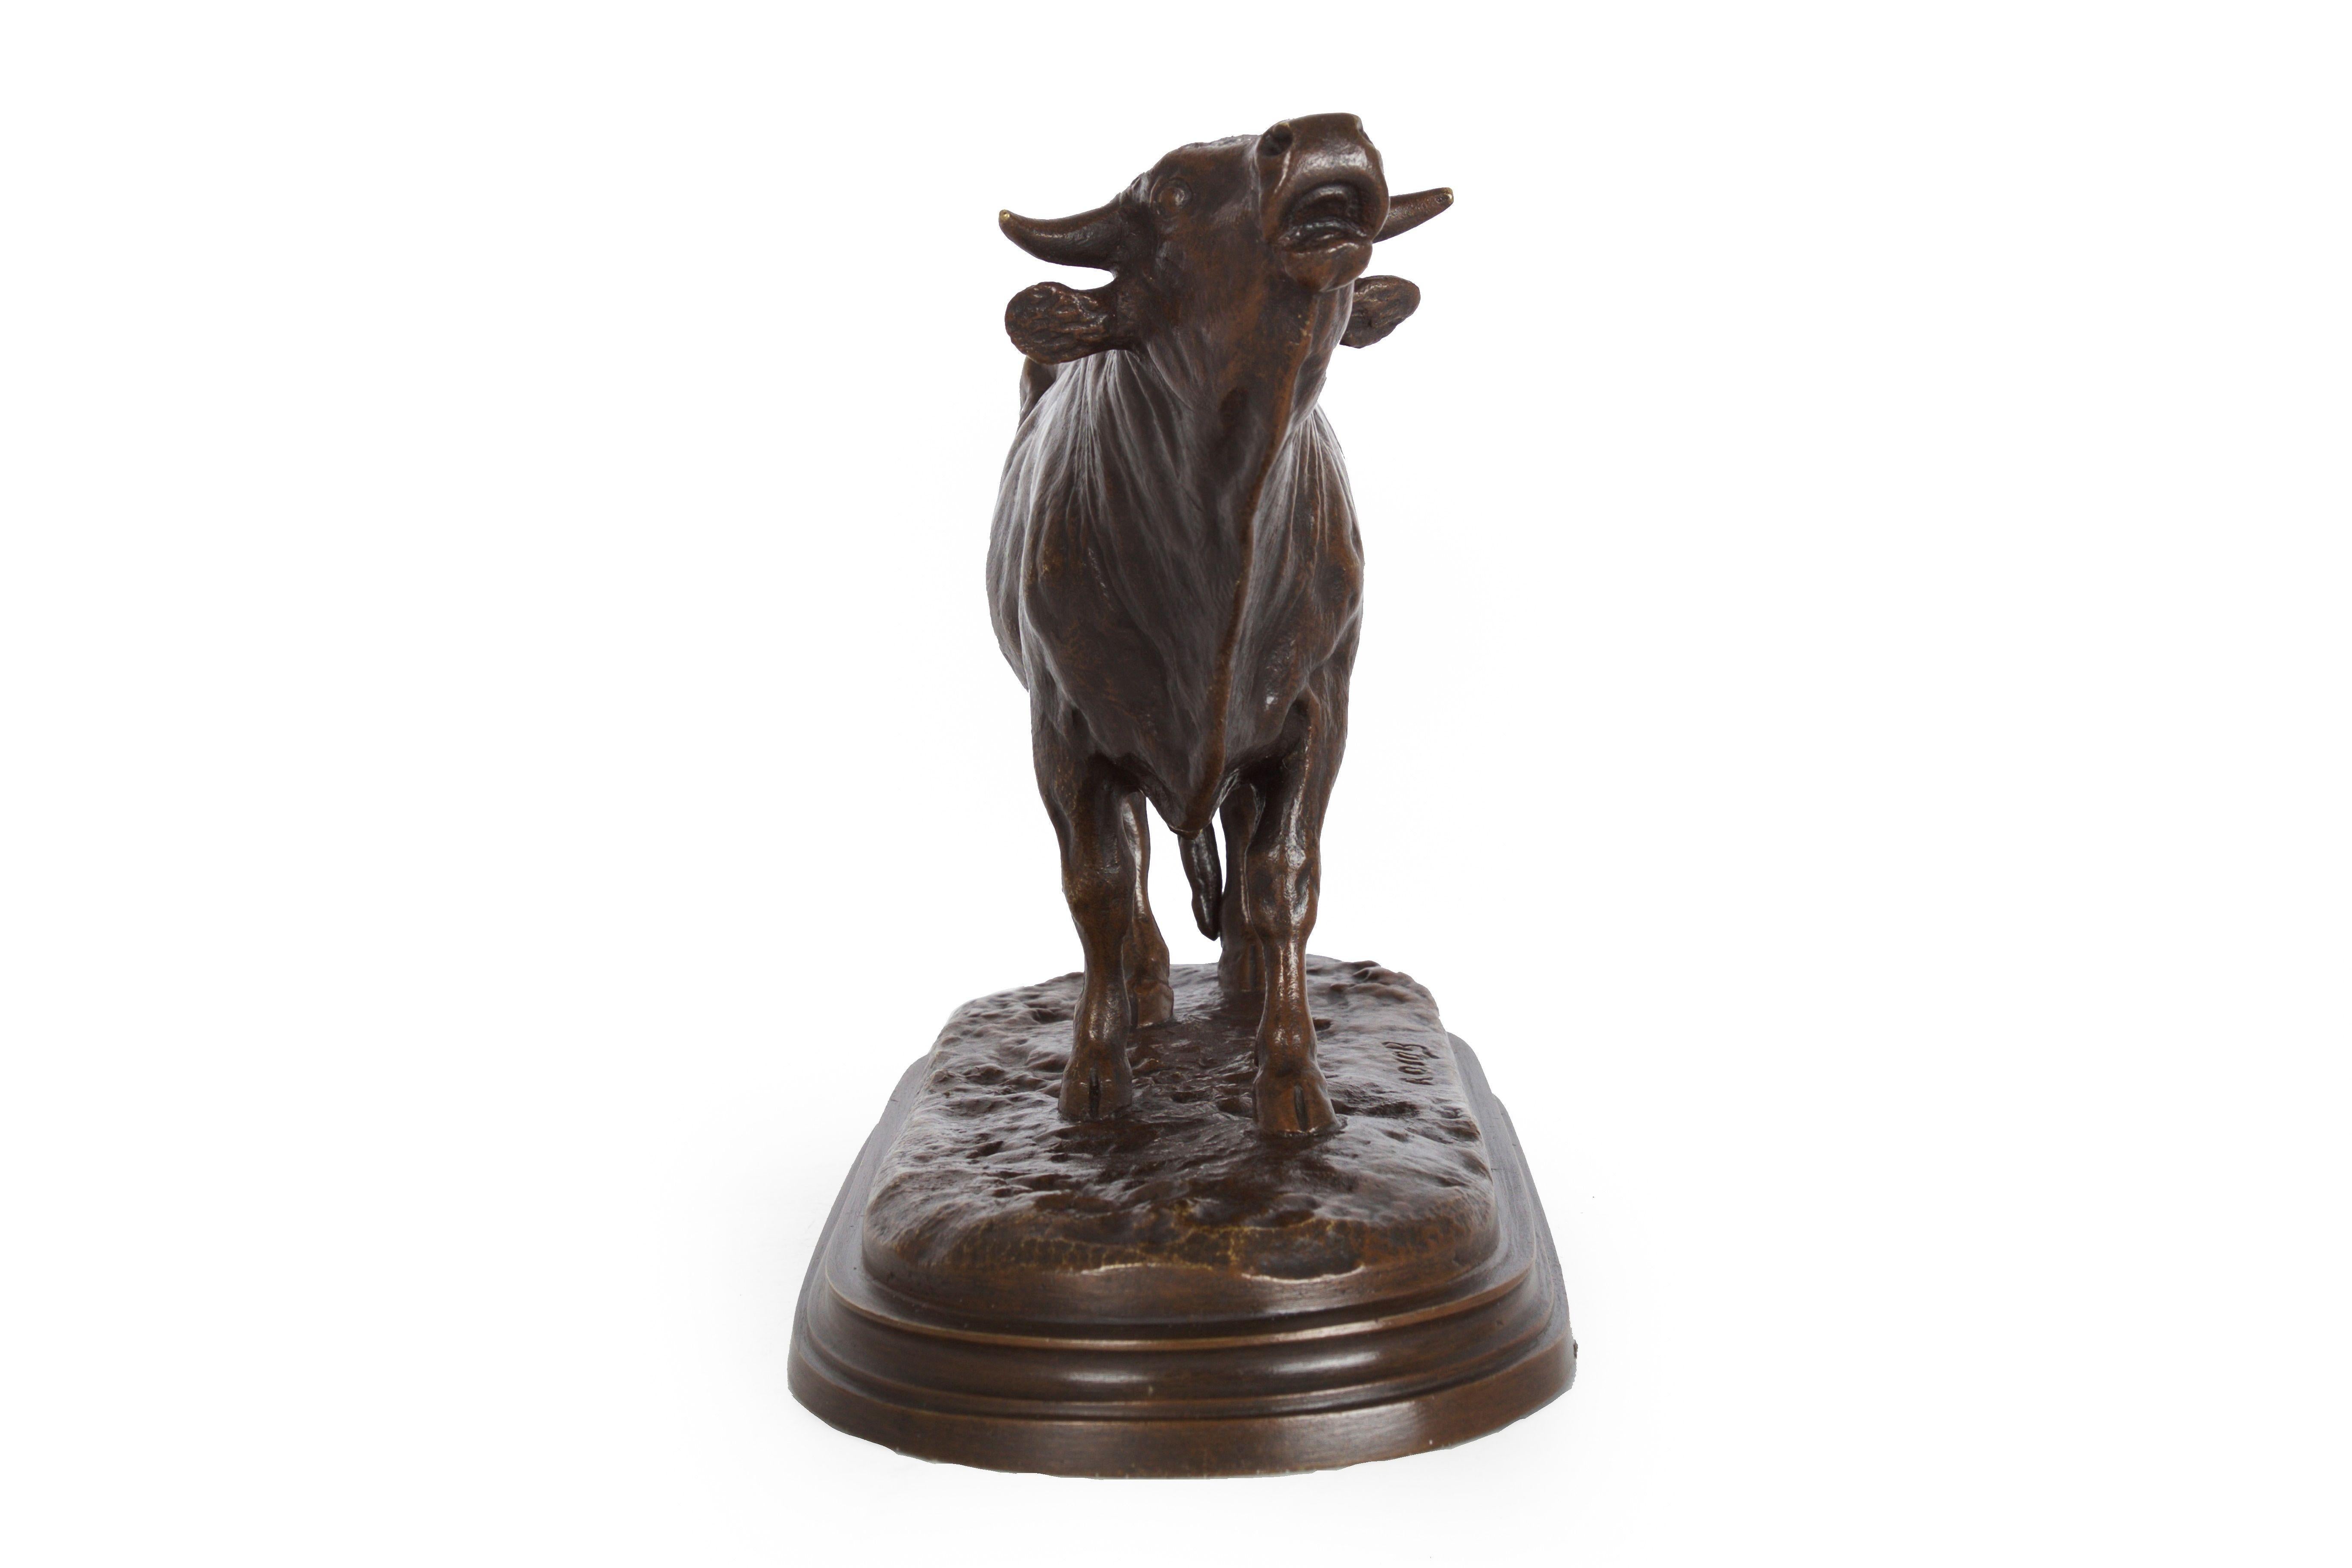 A finely cast lifetime bronze sculpture by Rosa Bonheur, this gorgeous model captures a bellowing bull over a naturalistic base is finished in a pleasing overall brown chemical patina. It is a lively model with wonderful surface texture throughout.